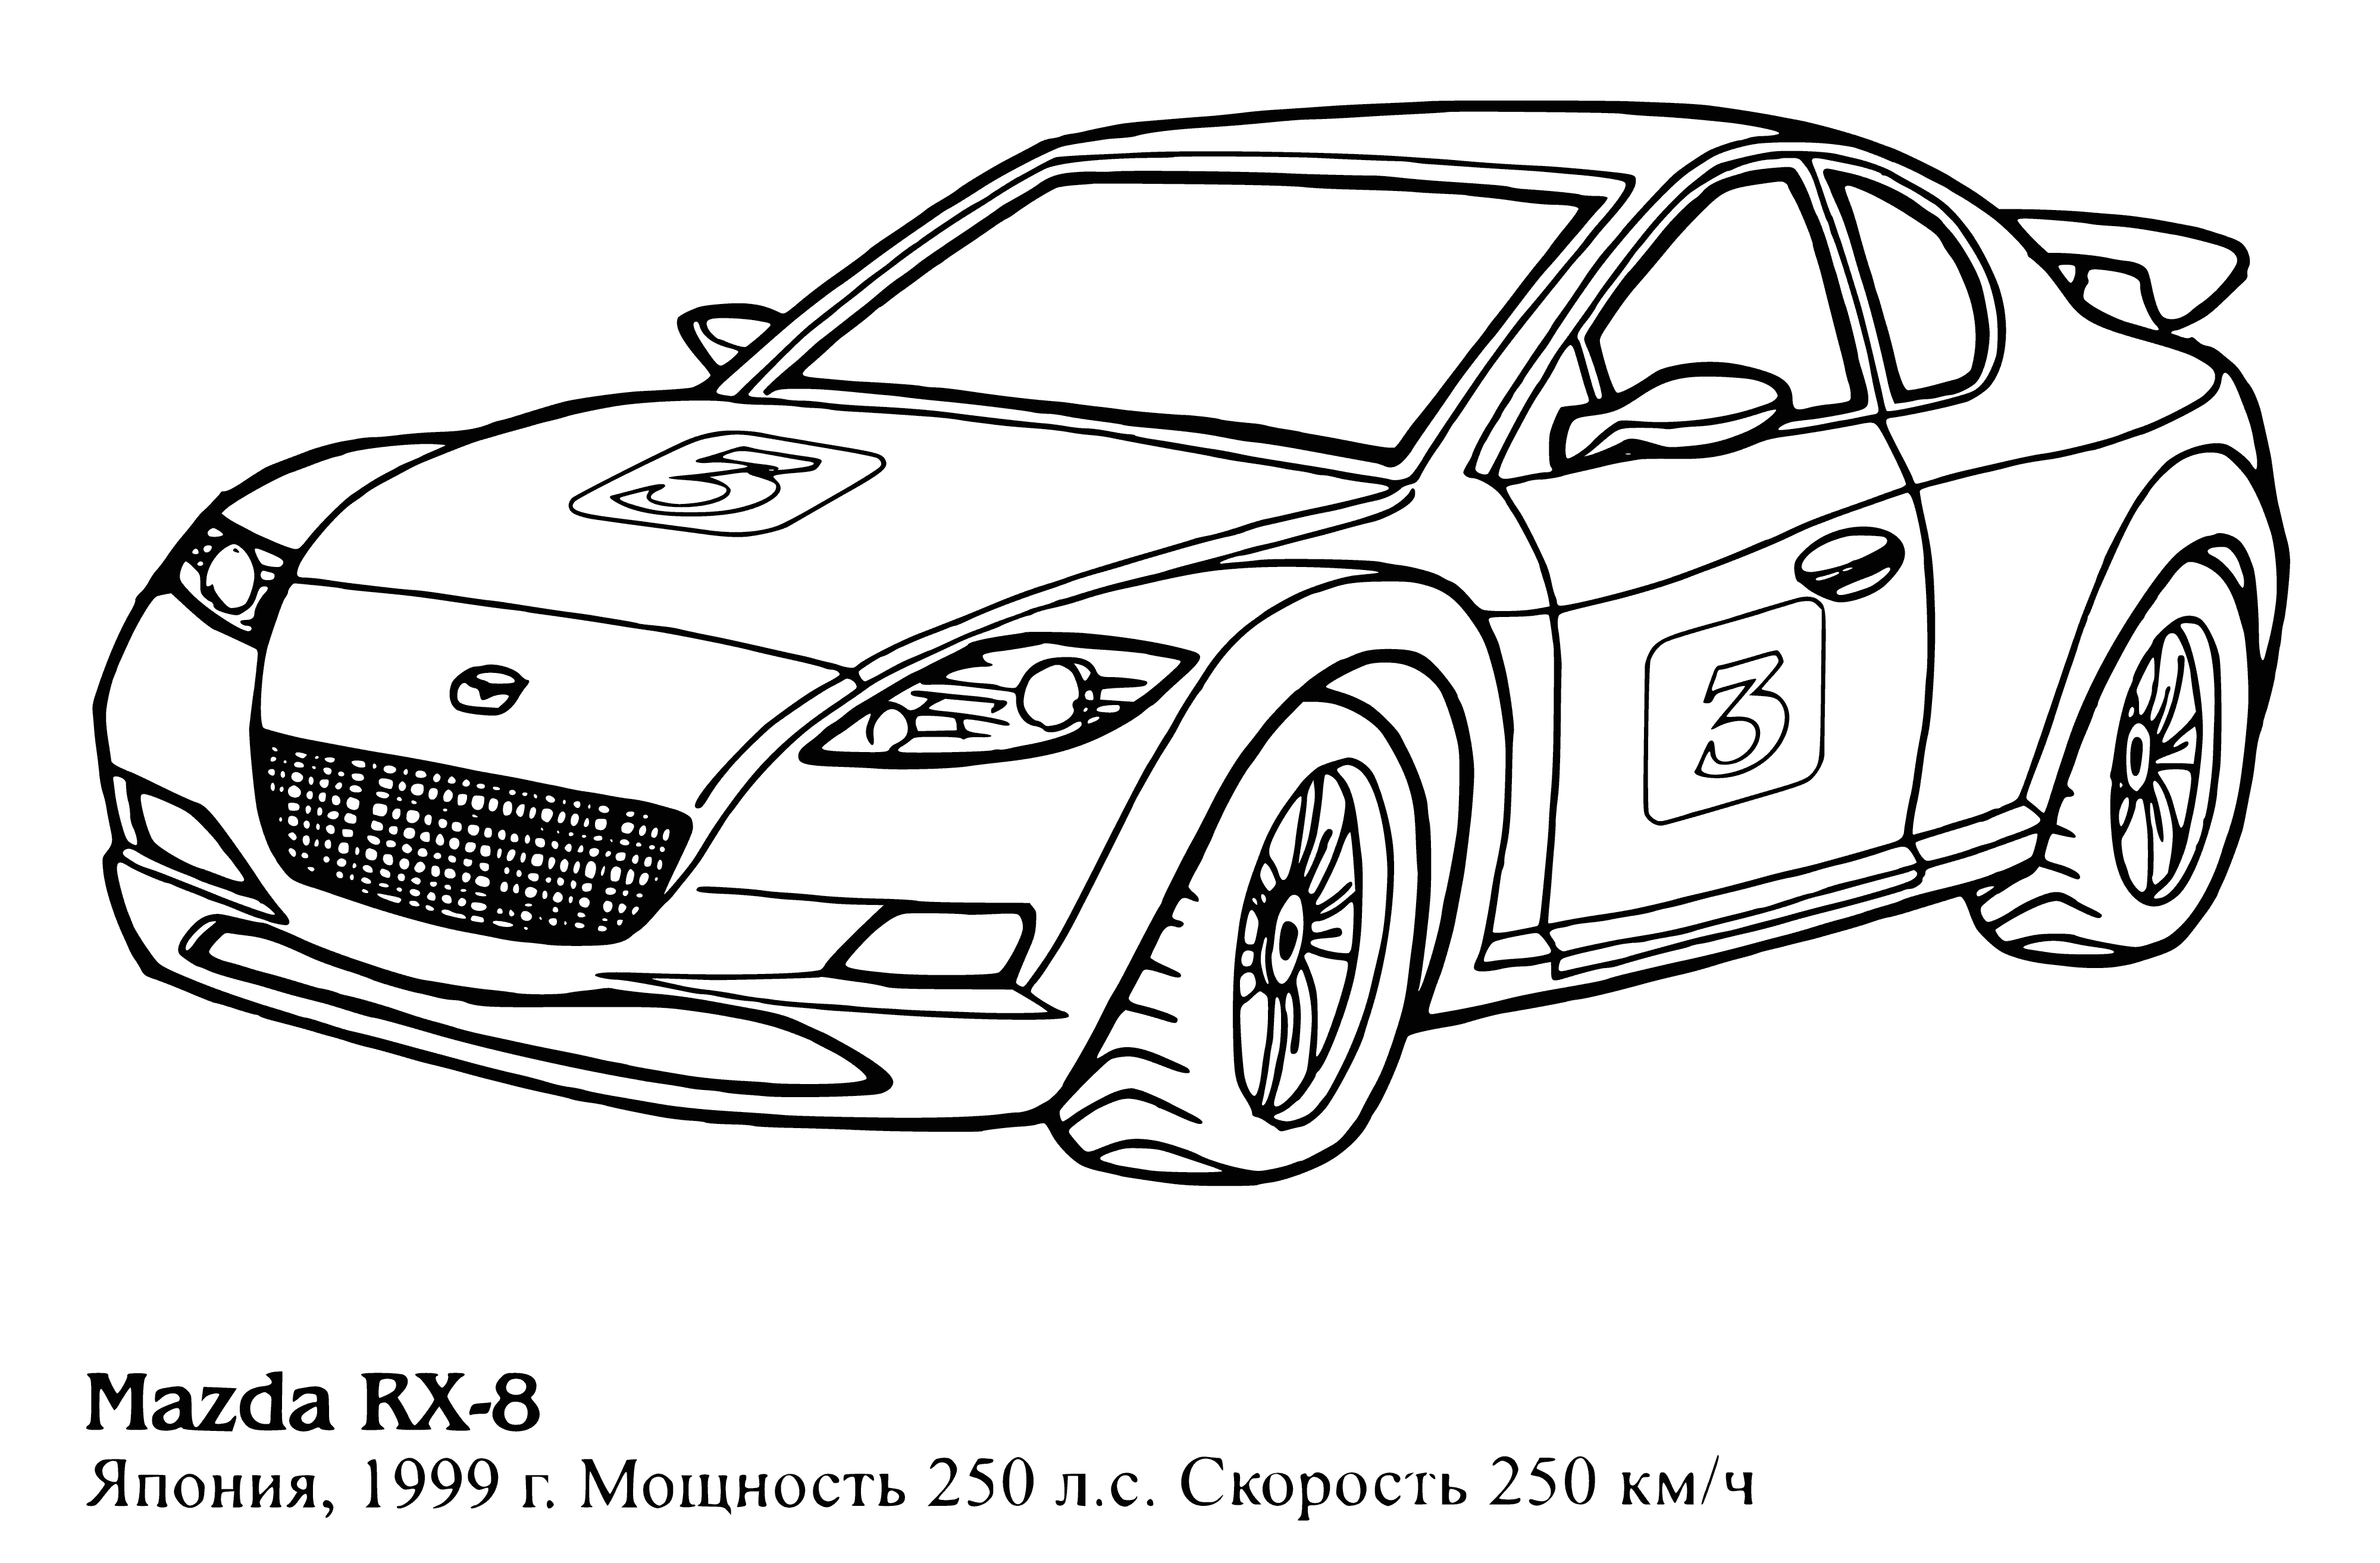 coloring page: Mazda RX-8 is a sports car with a stylish design and four doors; red with black accents and the Mazda logo on the front.